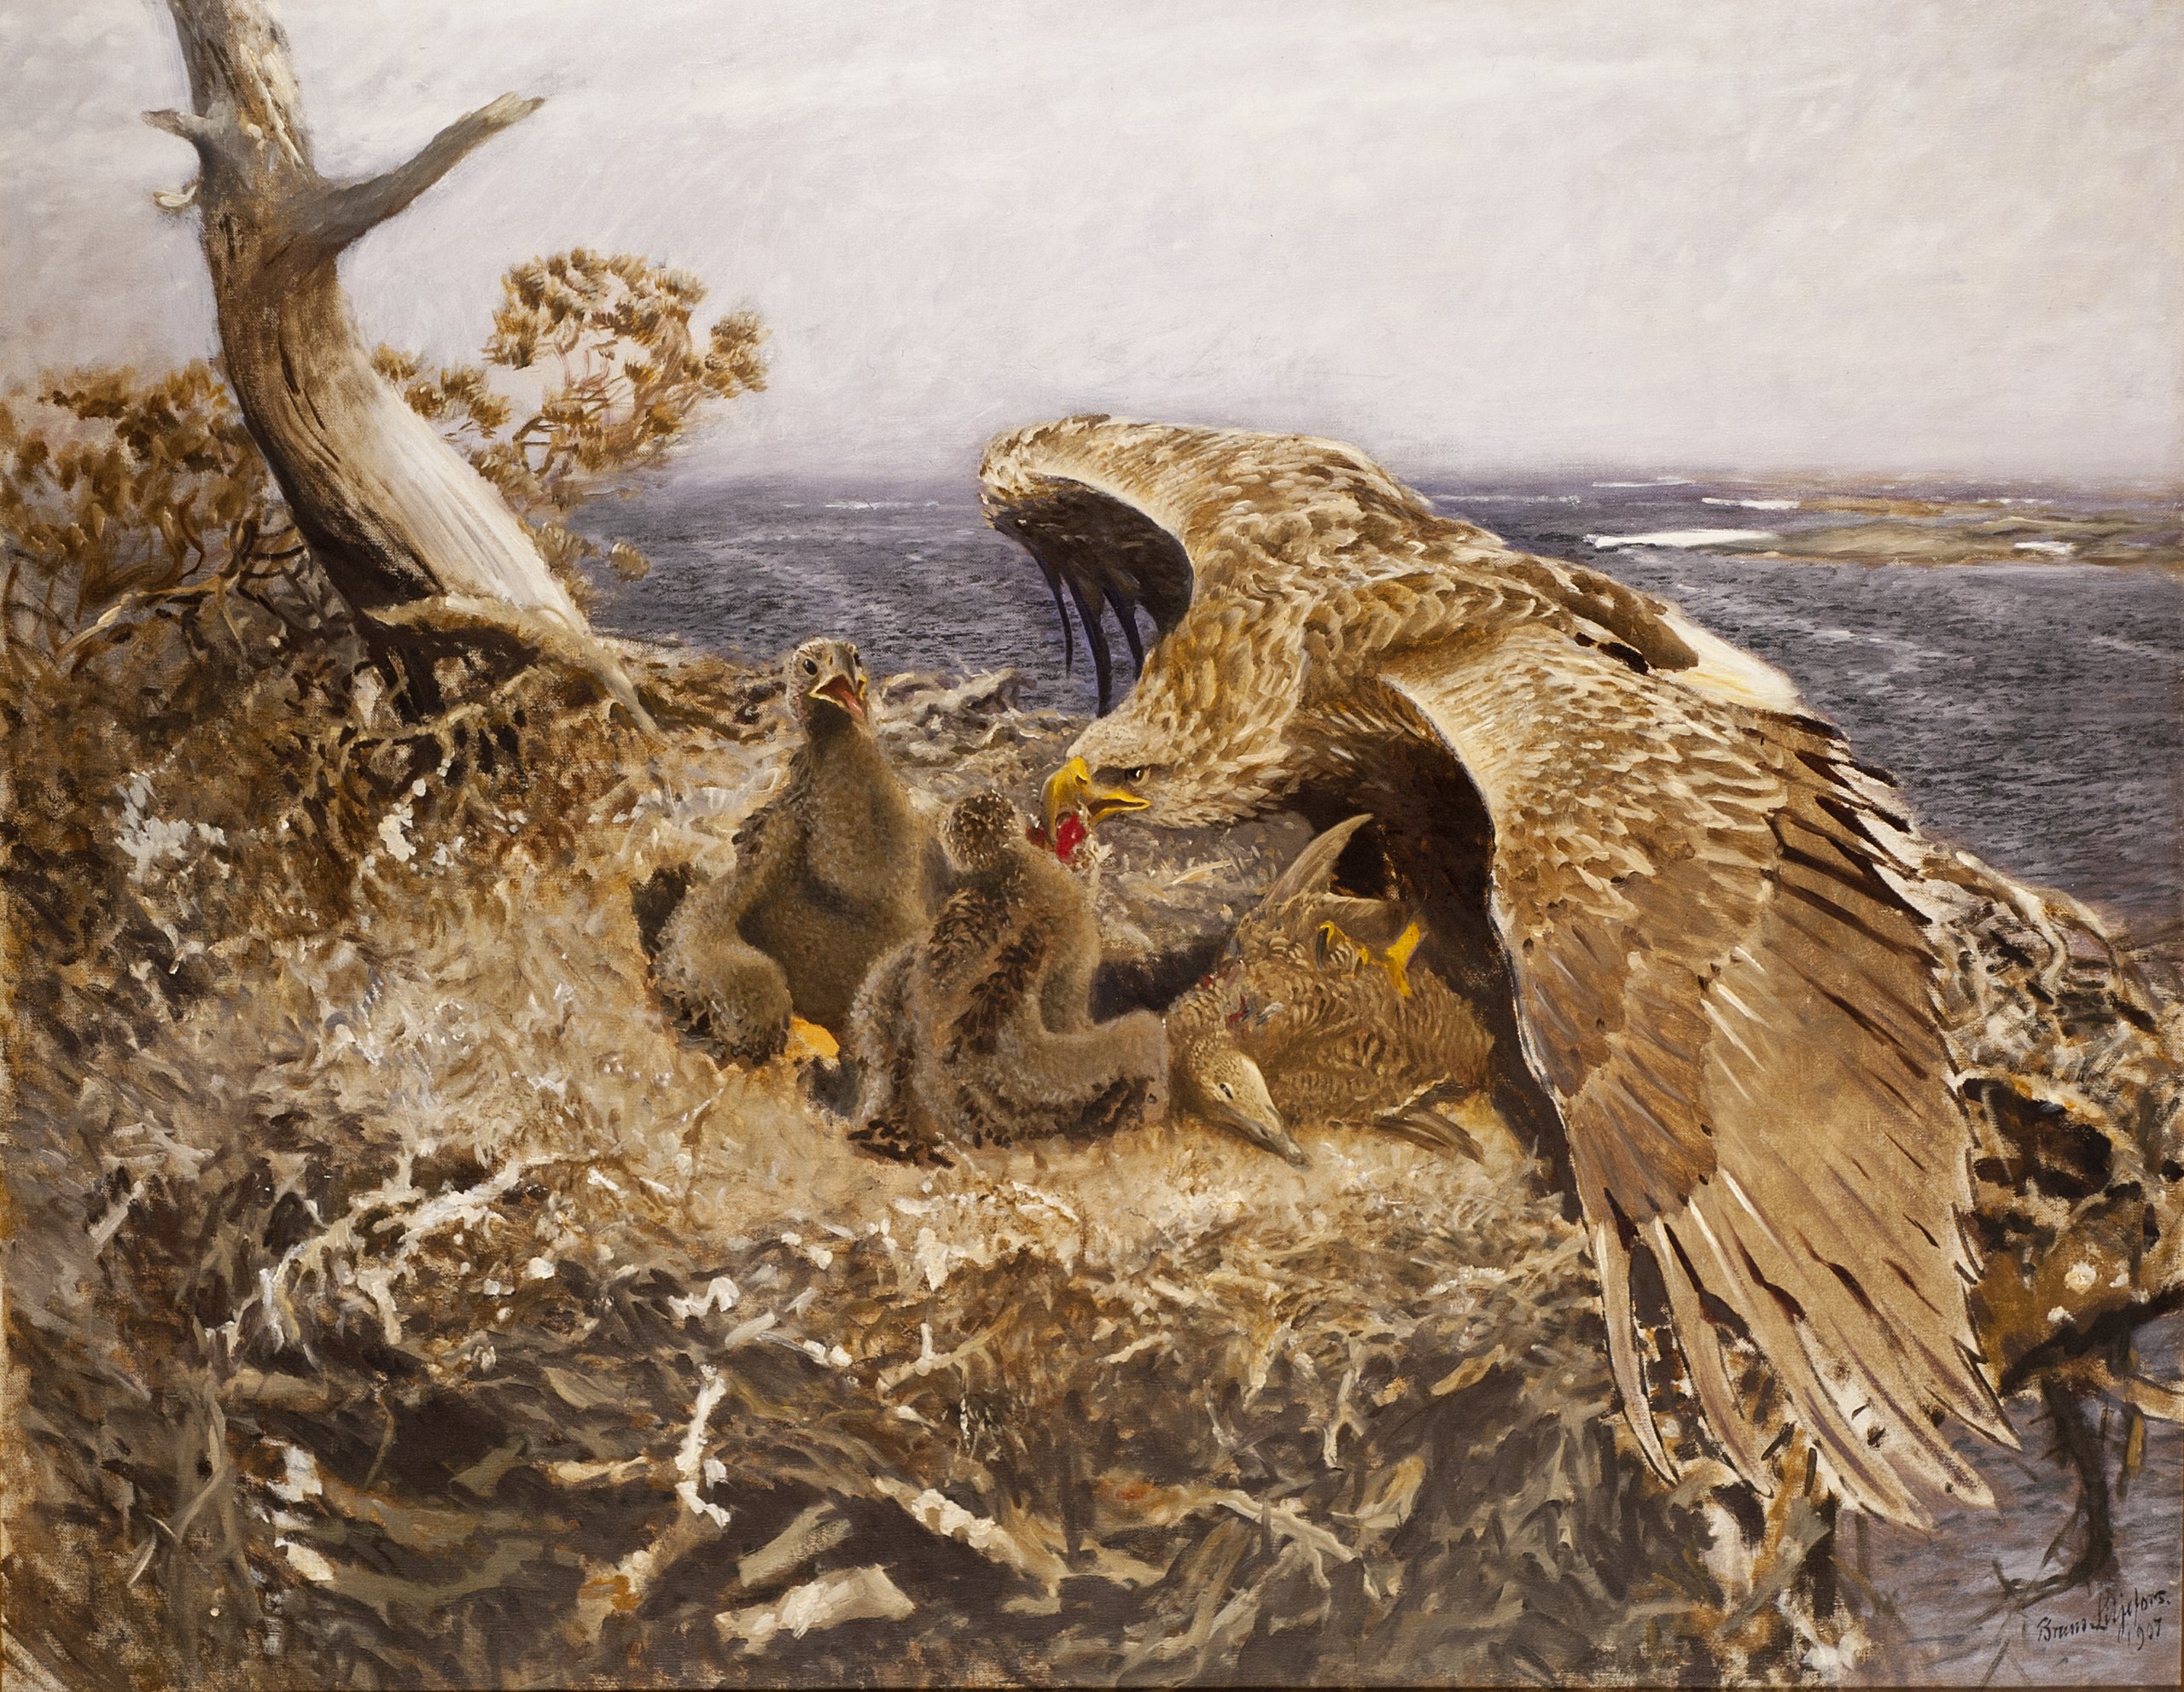 An eagle feeding hatchlings in a nest by the ocean